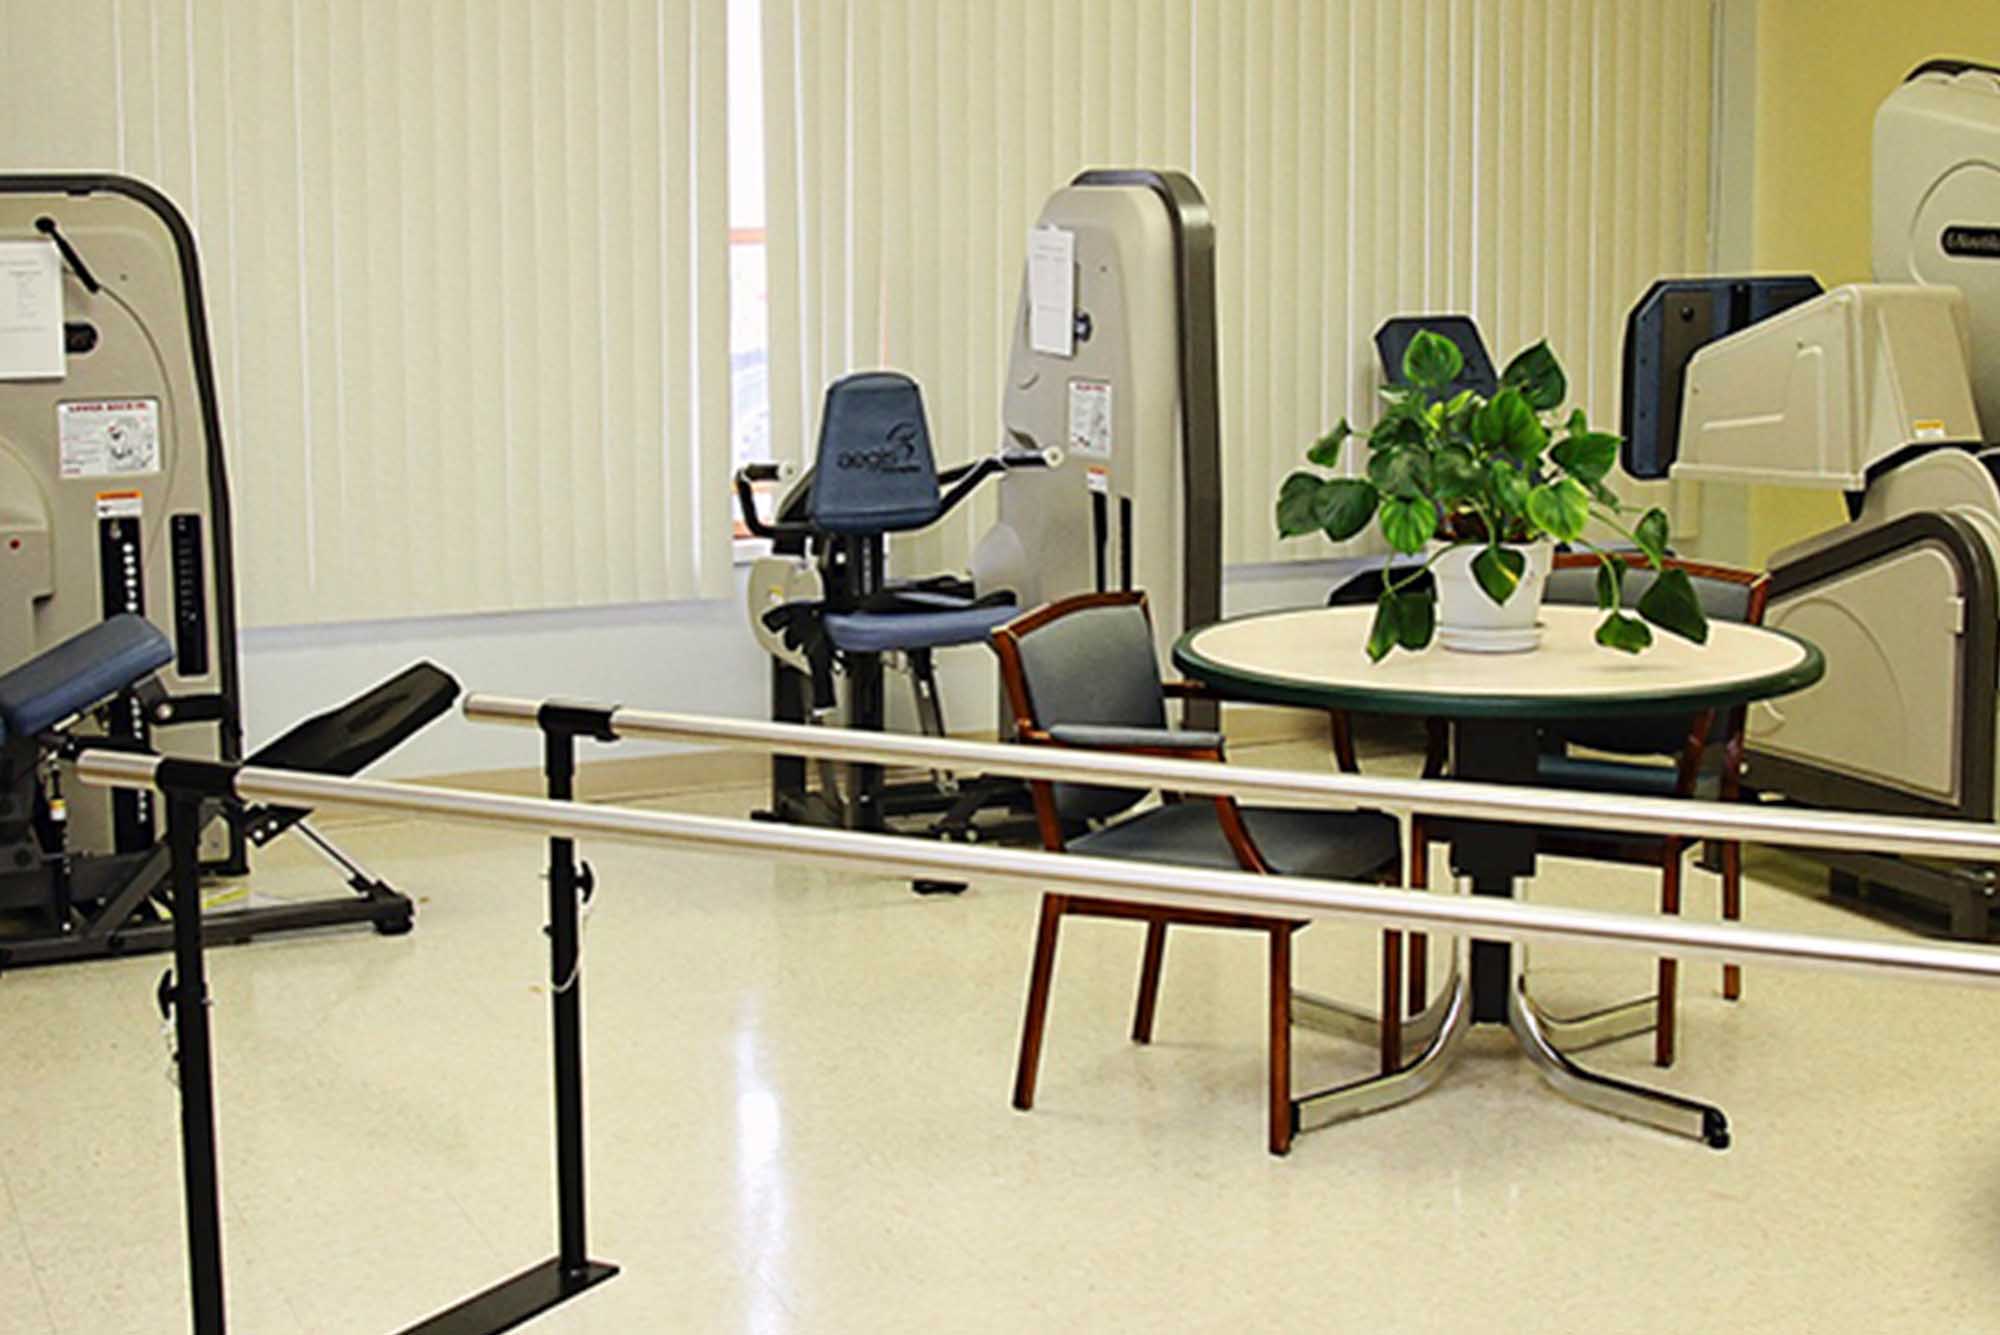 Rehabilitation center physical therapy machines